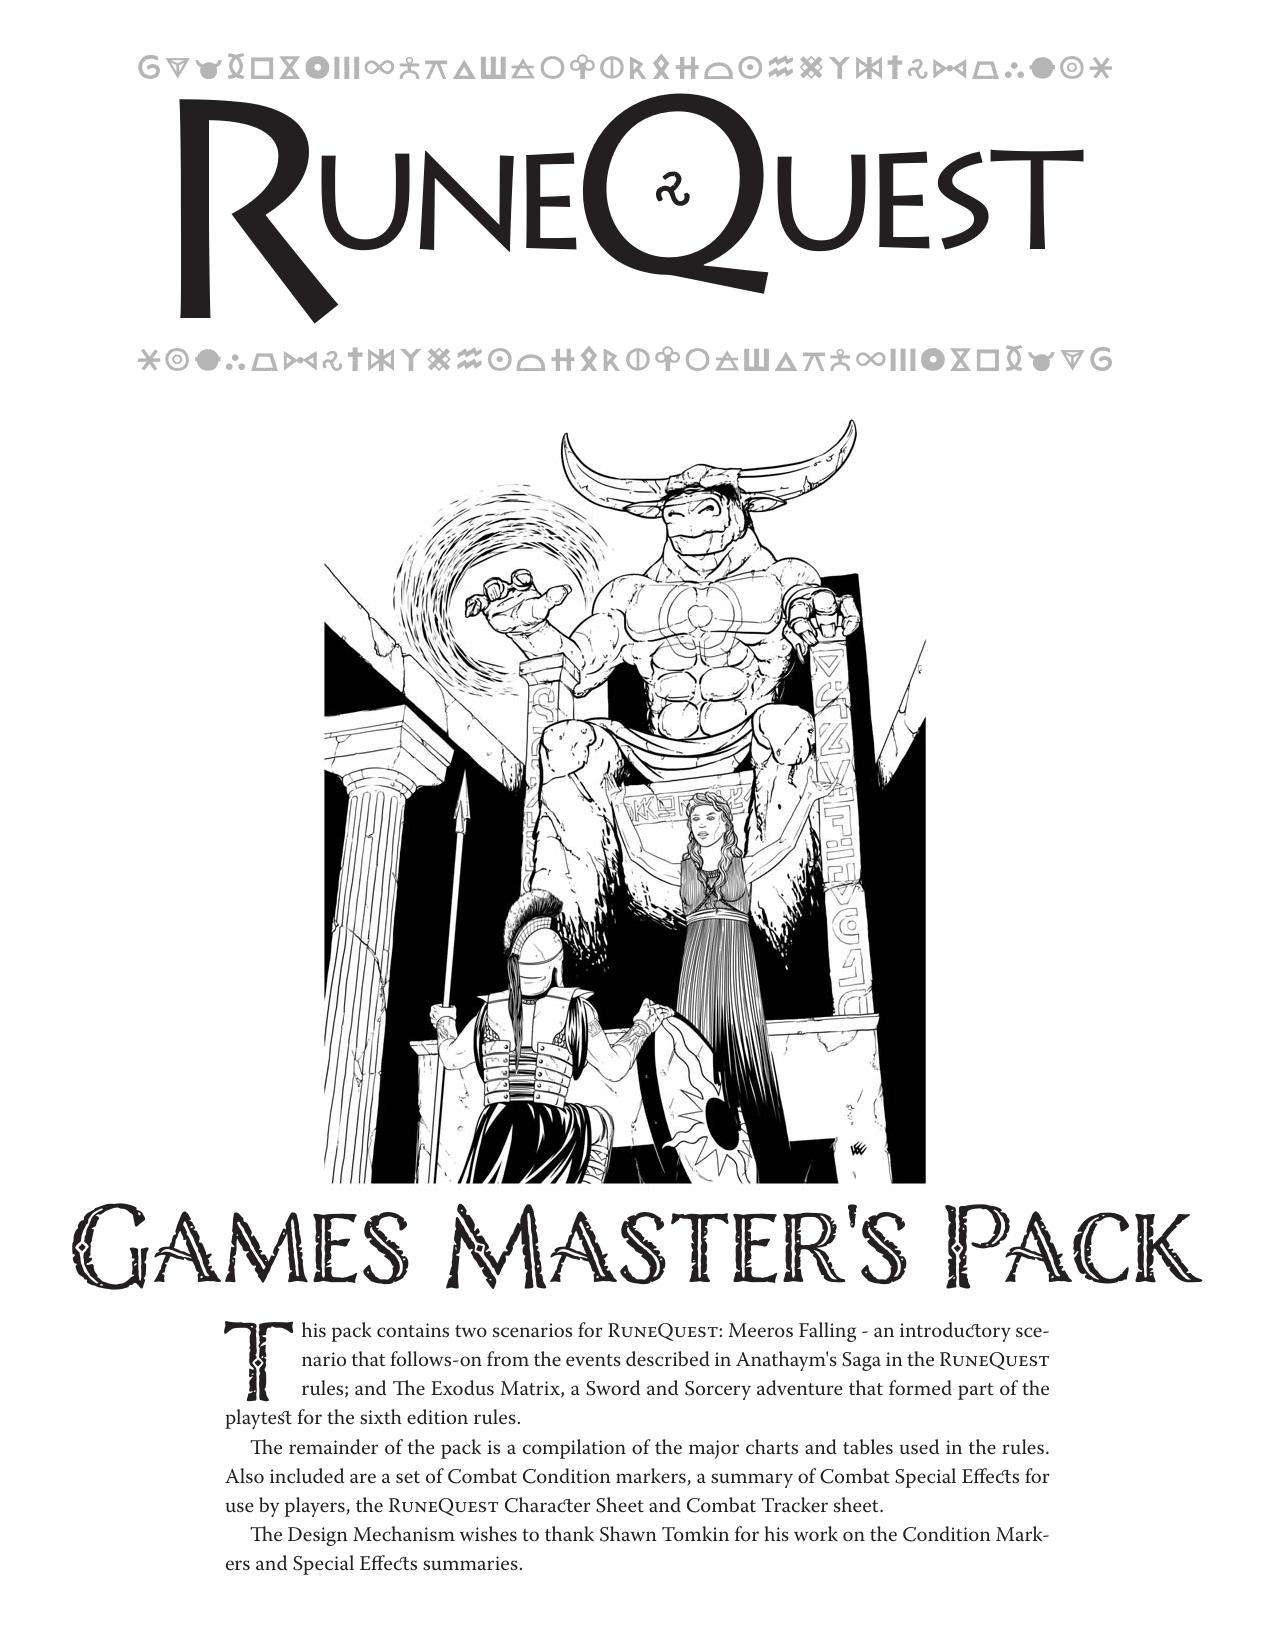 Games Master's Pack